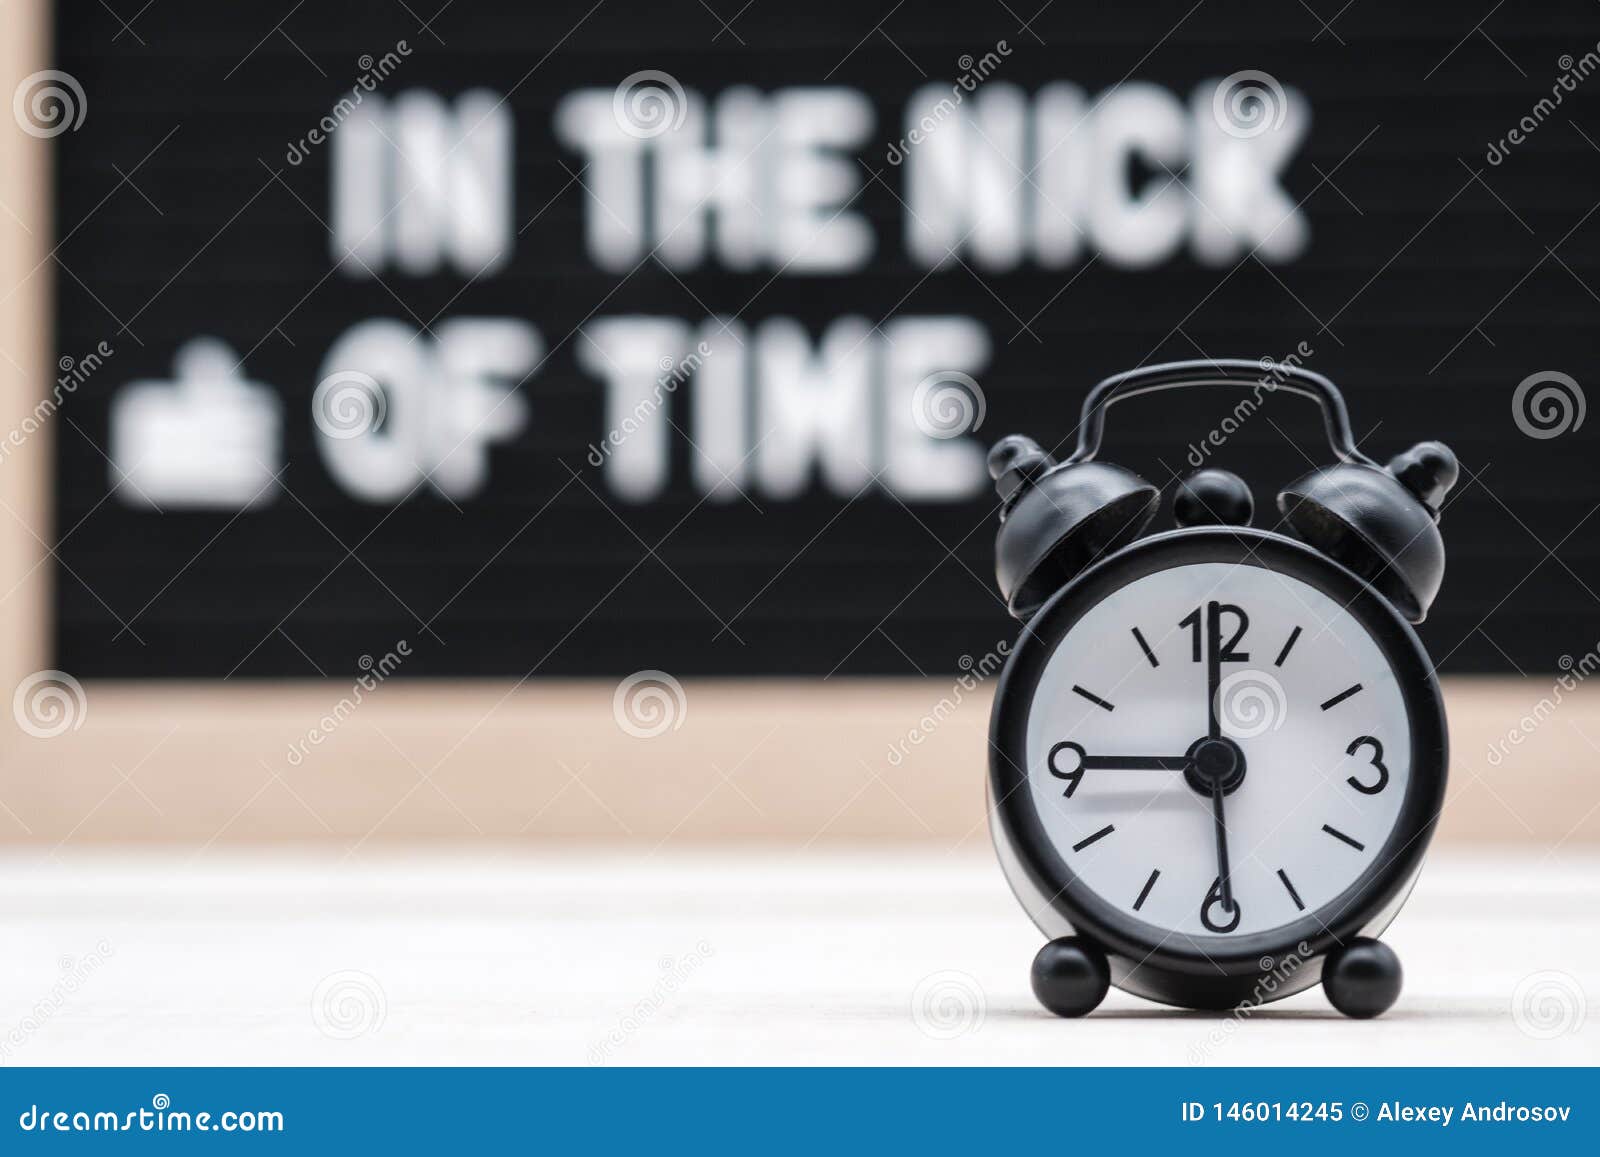 black vintage alarm clock on the background of signs with the inscription in the nick of time